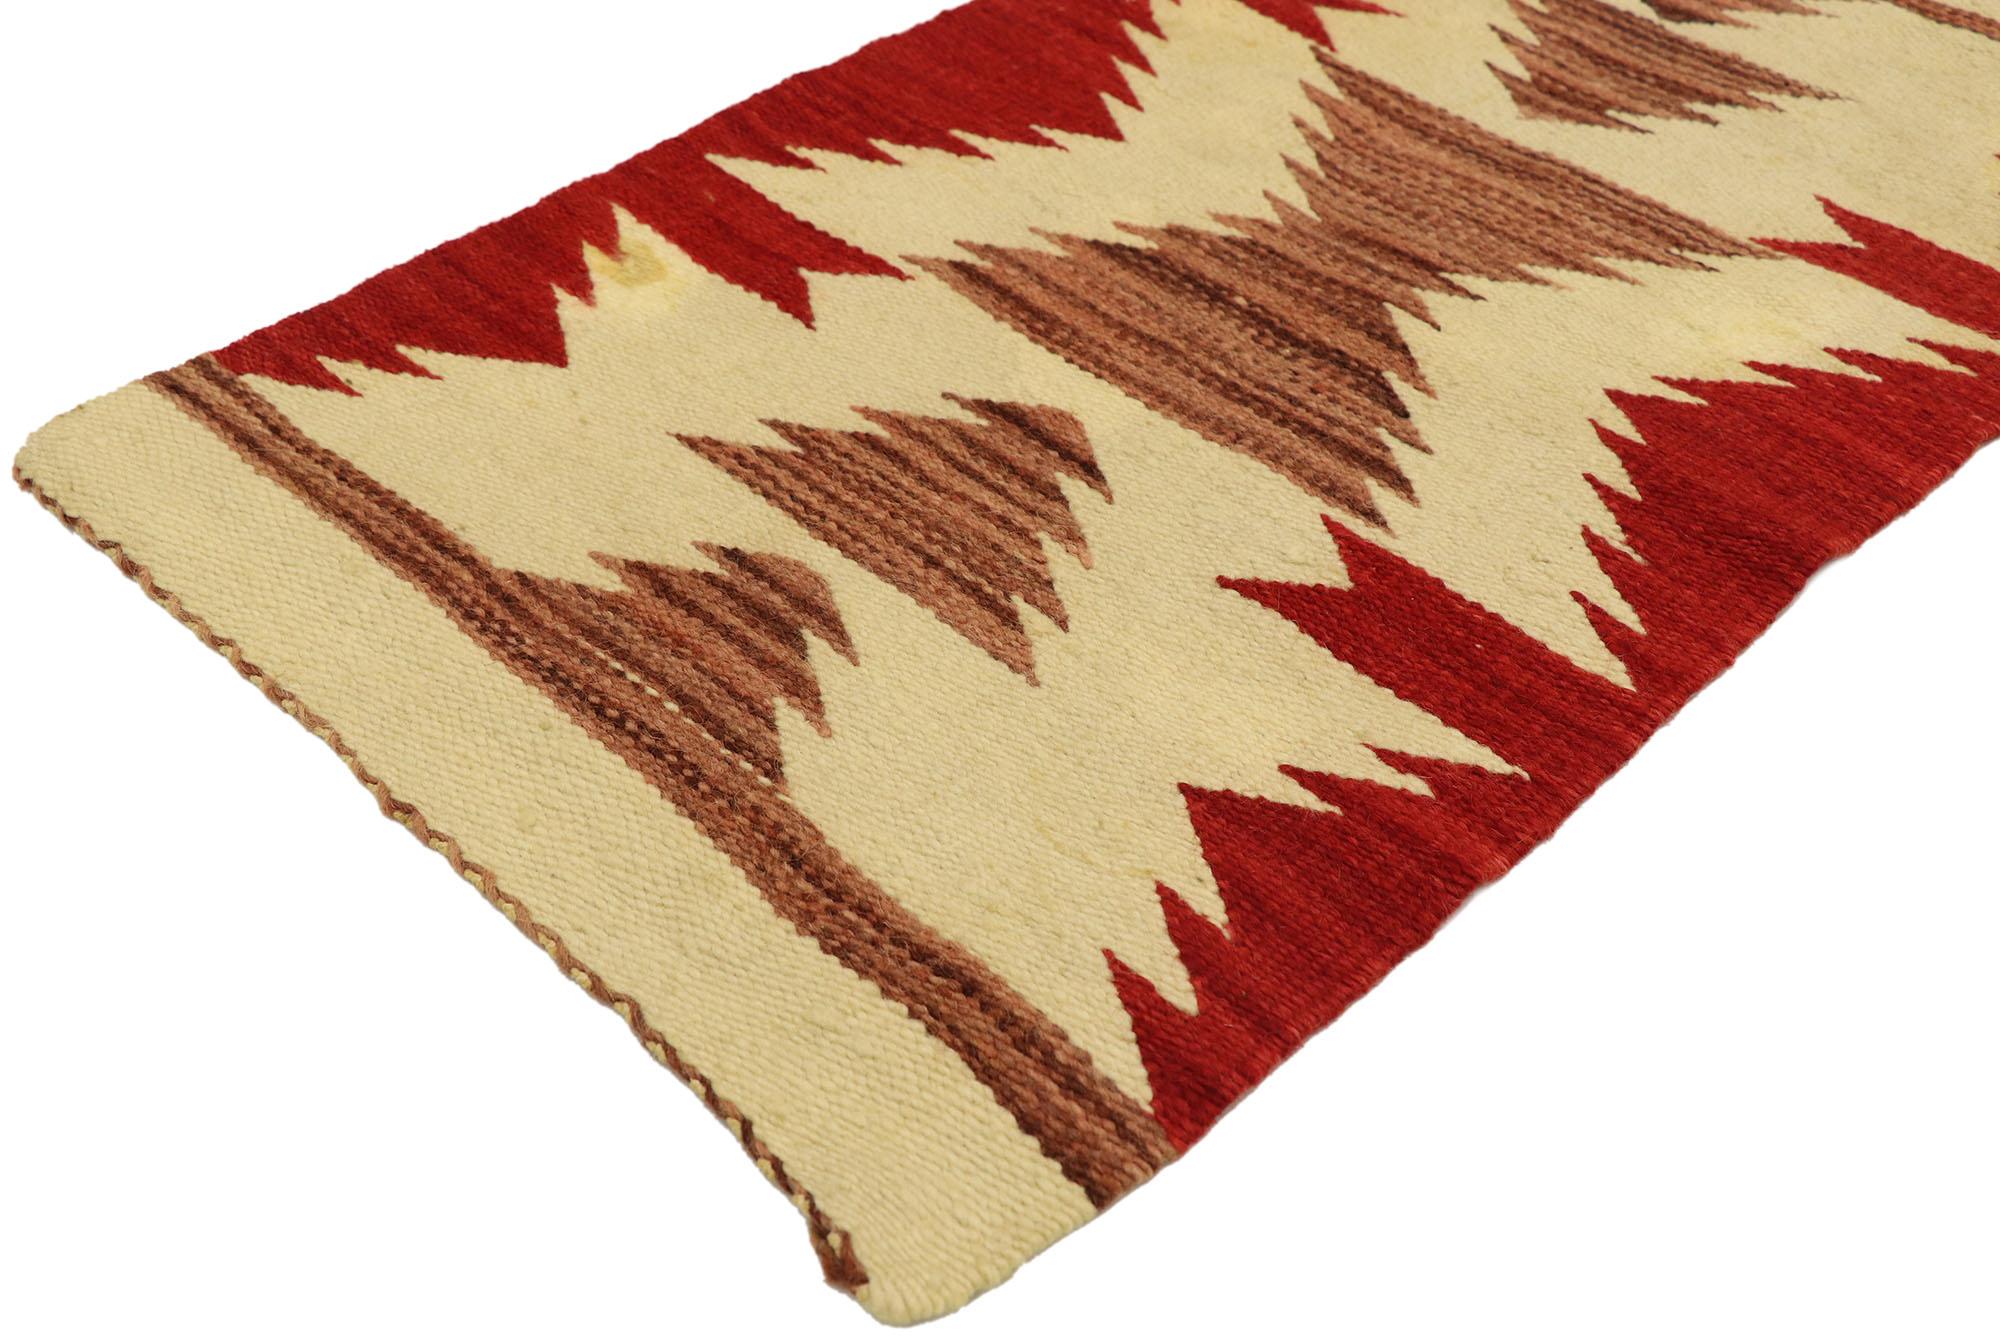 74756 Native American Antique Kilim rug with Navajo Two Grey Hills style. With its bold expressive design, incredible detail and texture, this hand-woven wool antique Navajo accent rug is a captivating vision of woven beauty highlighting Native